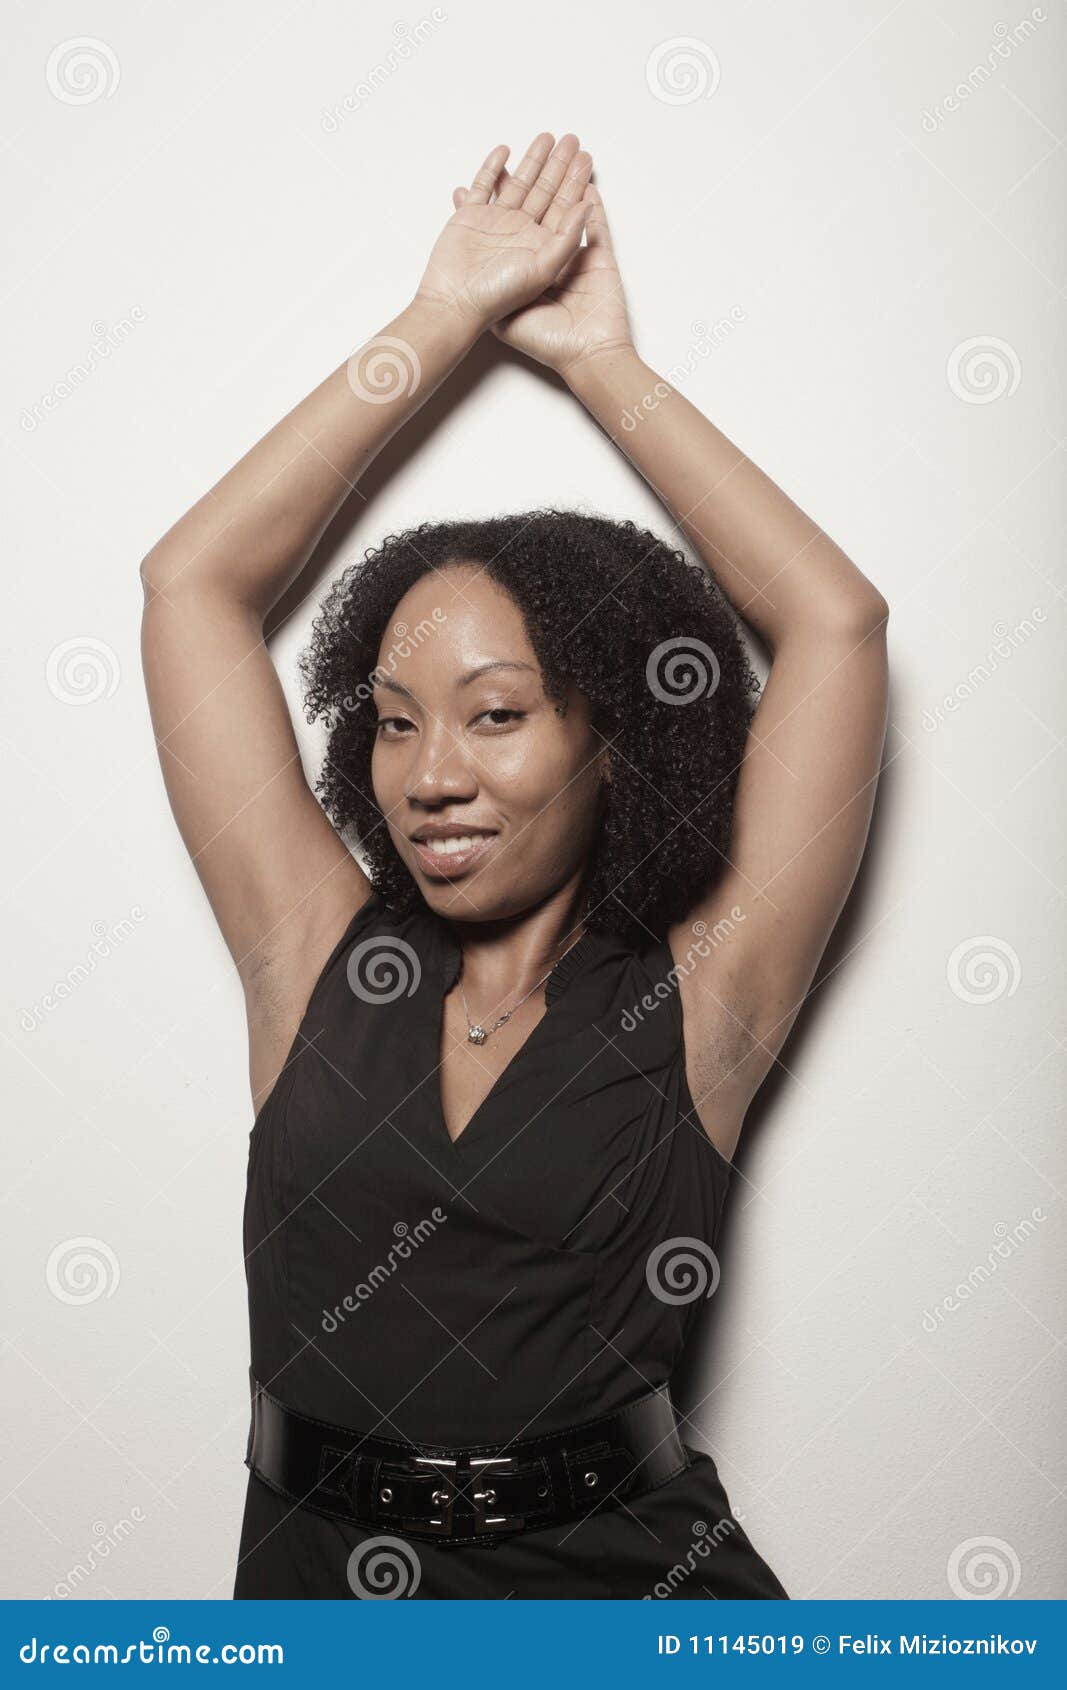 Woman Posing with Her Arms Above Her Head Stock Image - Image of